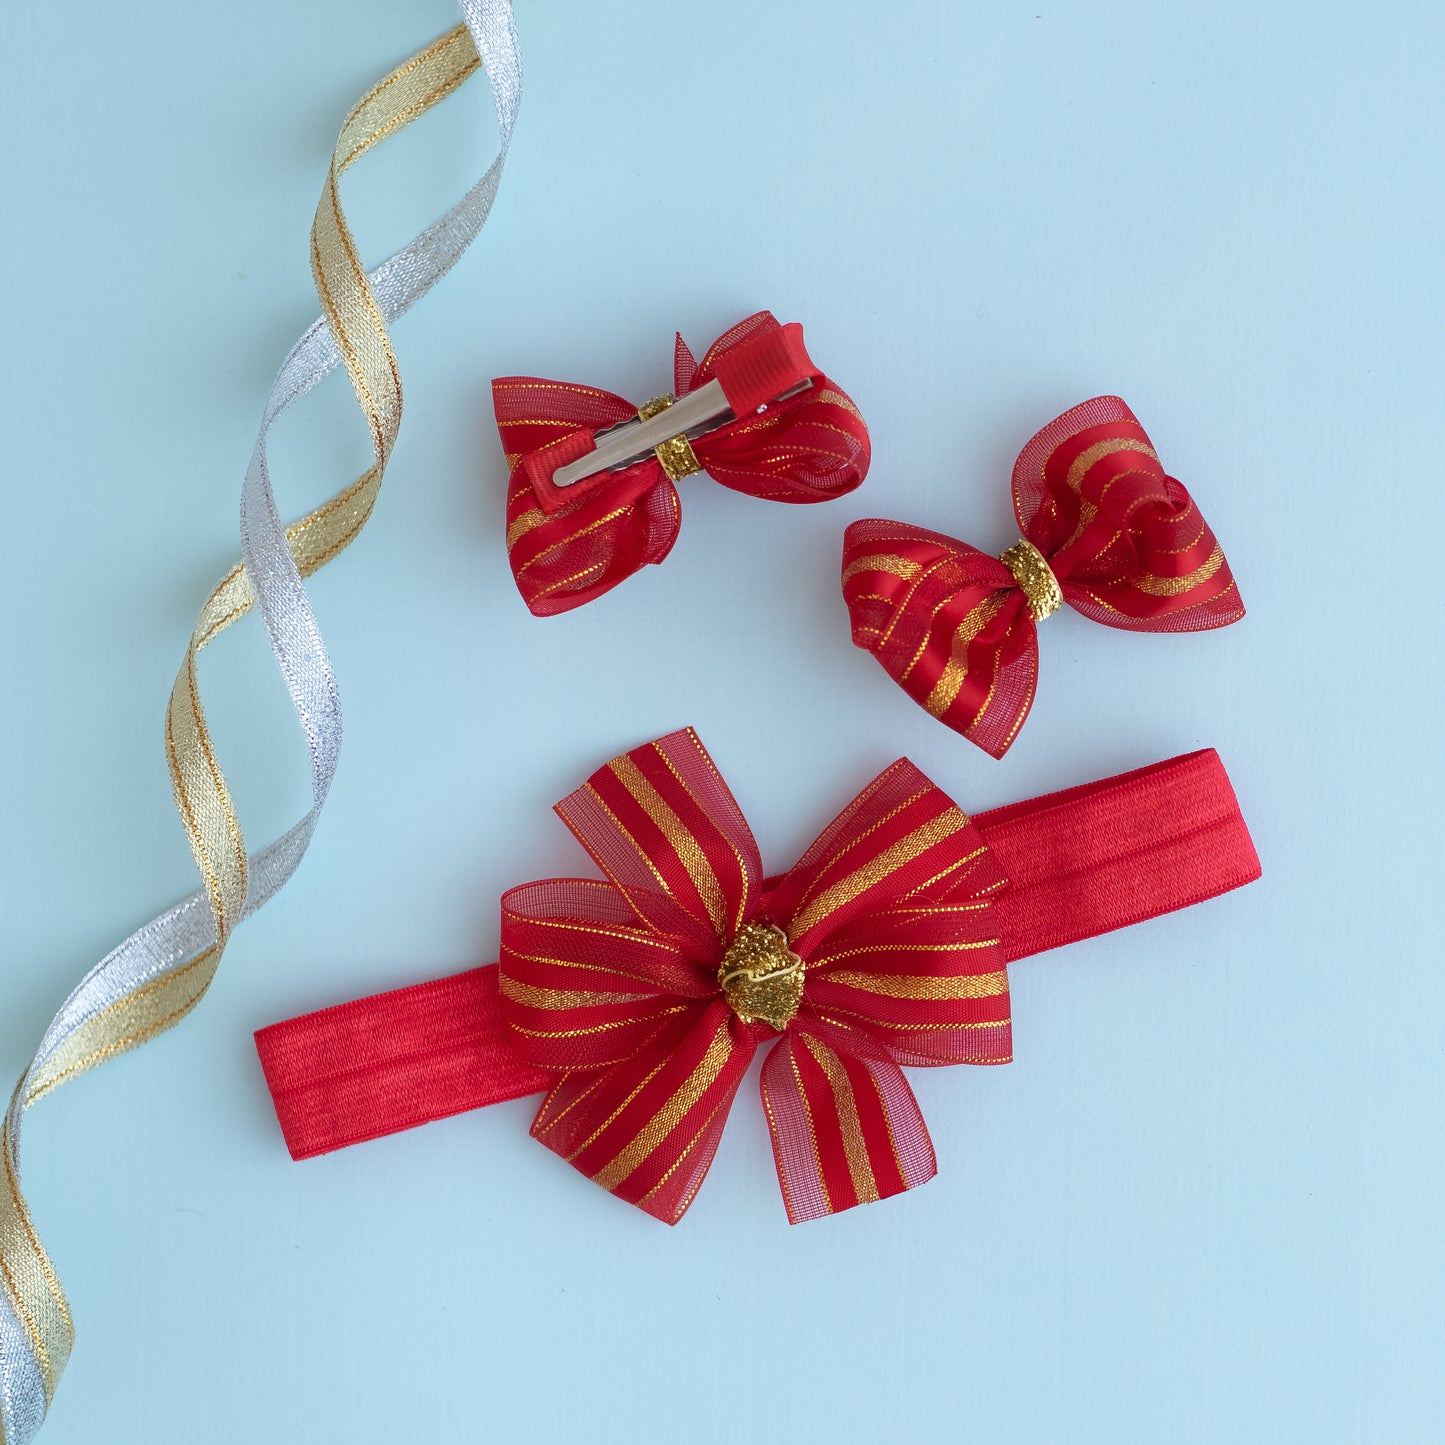 Combo : Set of 1 pair bow alligator pins & 1 pinwheel stretchy band  - Red, Gold